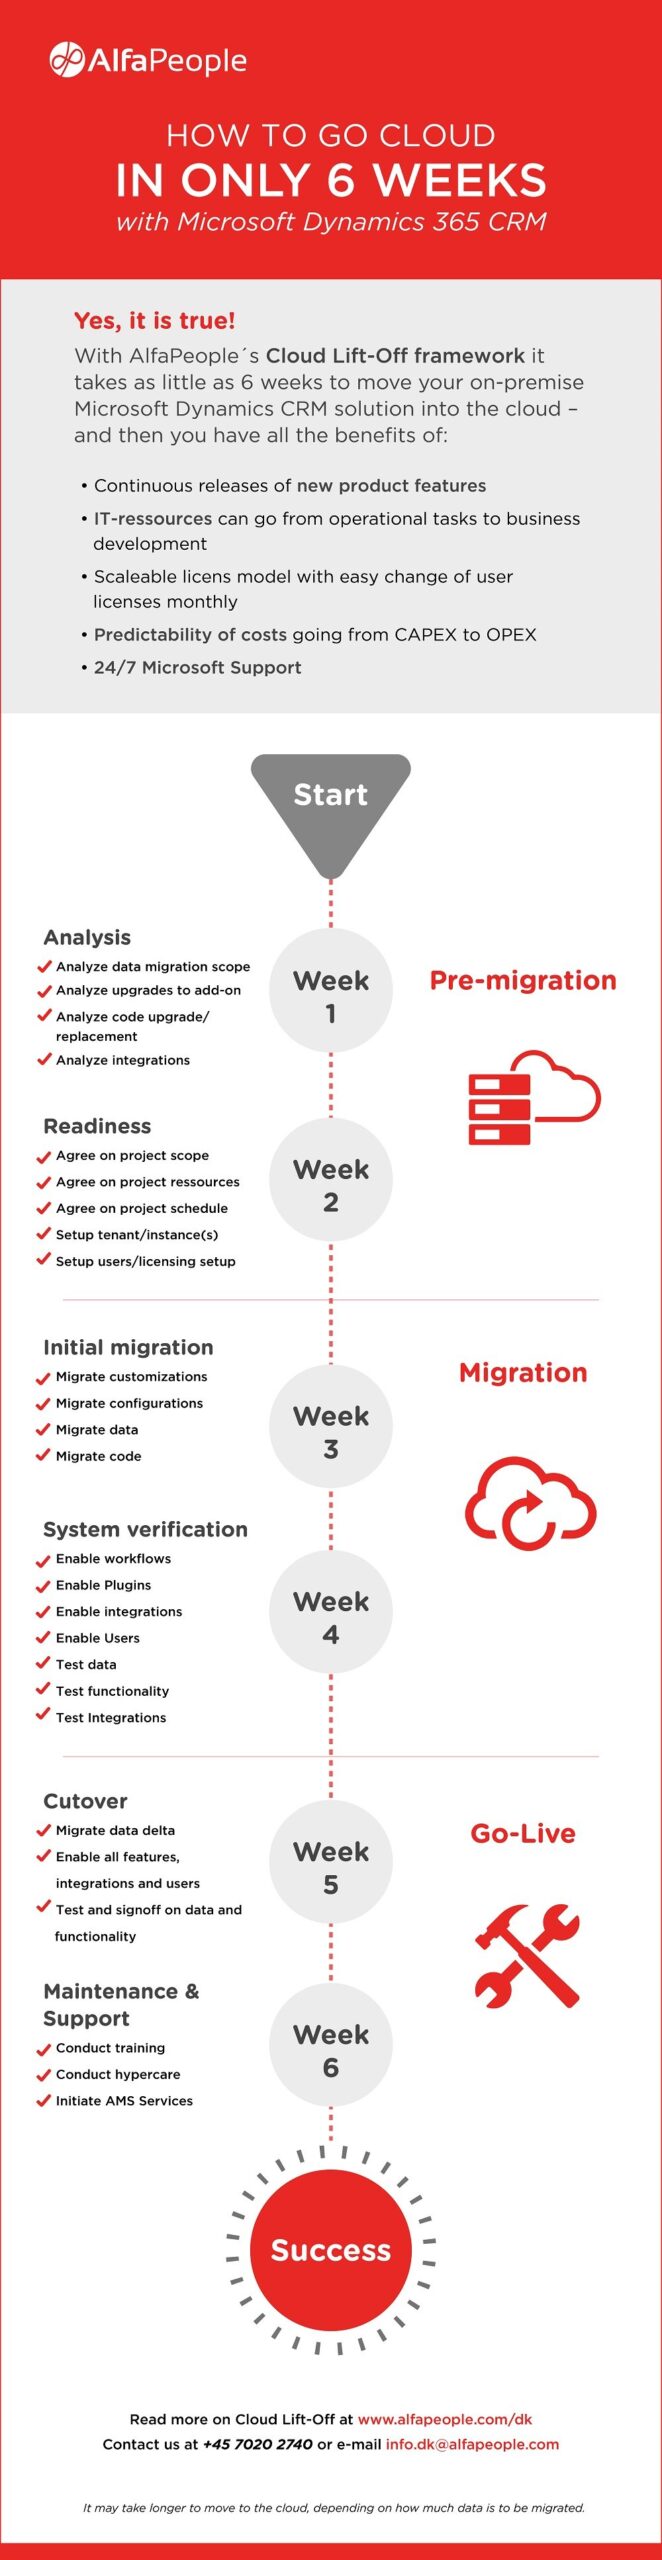 Infographic: How to go Cloud in Only 6 Weeks With Microsoft Dynamics 365 CRM